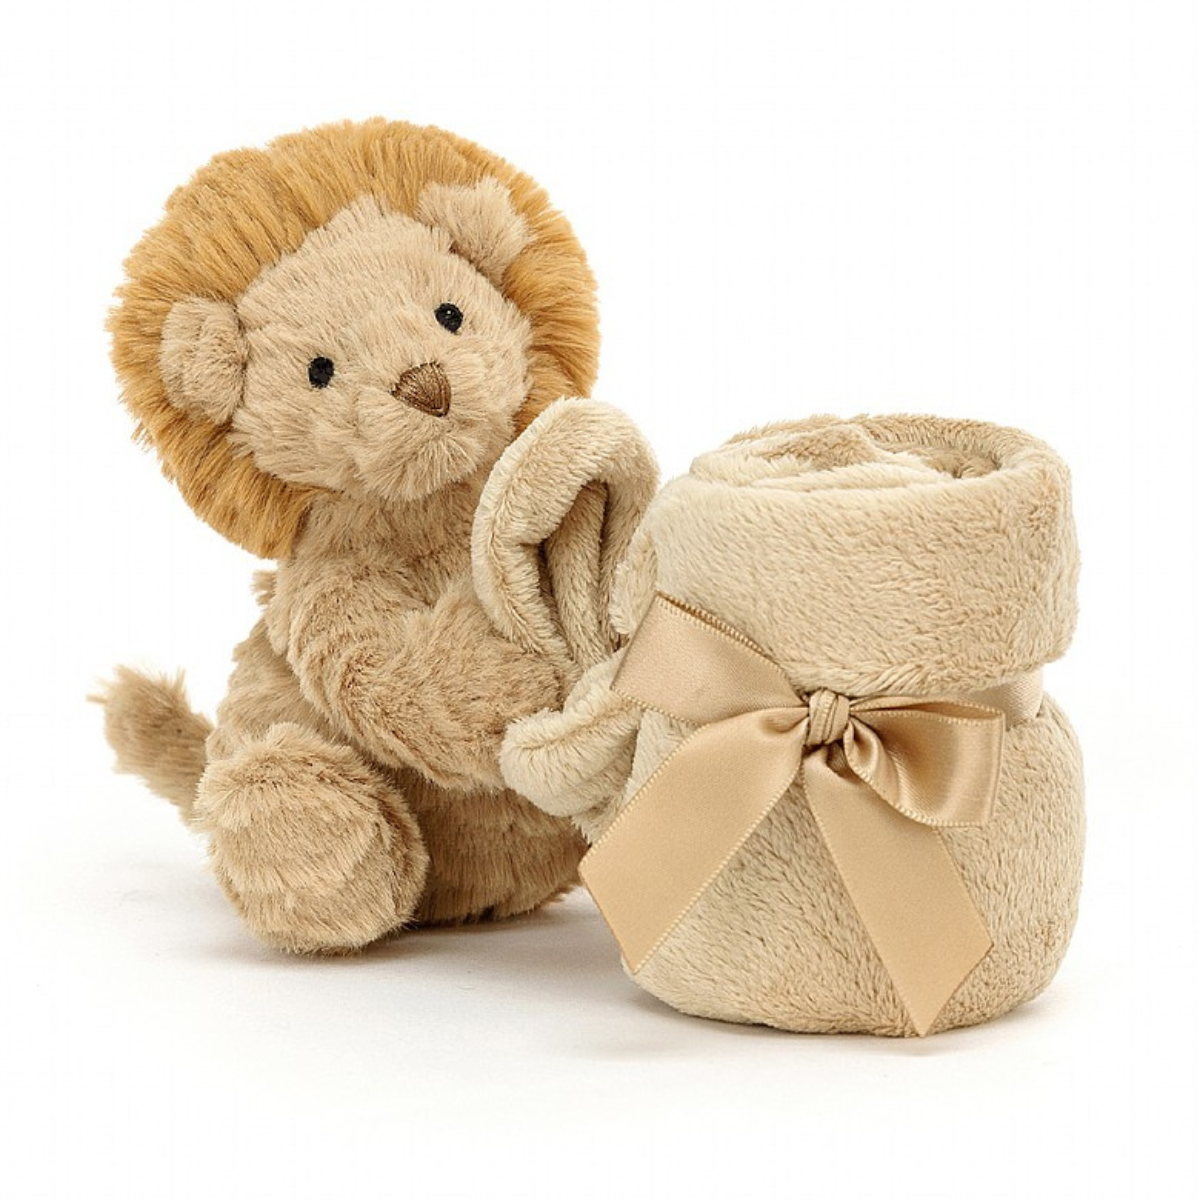 Jellycat – Fuddlewuddle Lion soother